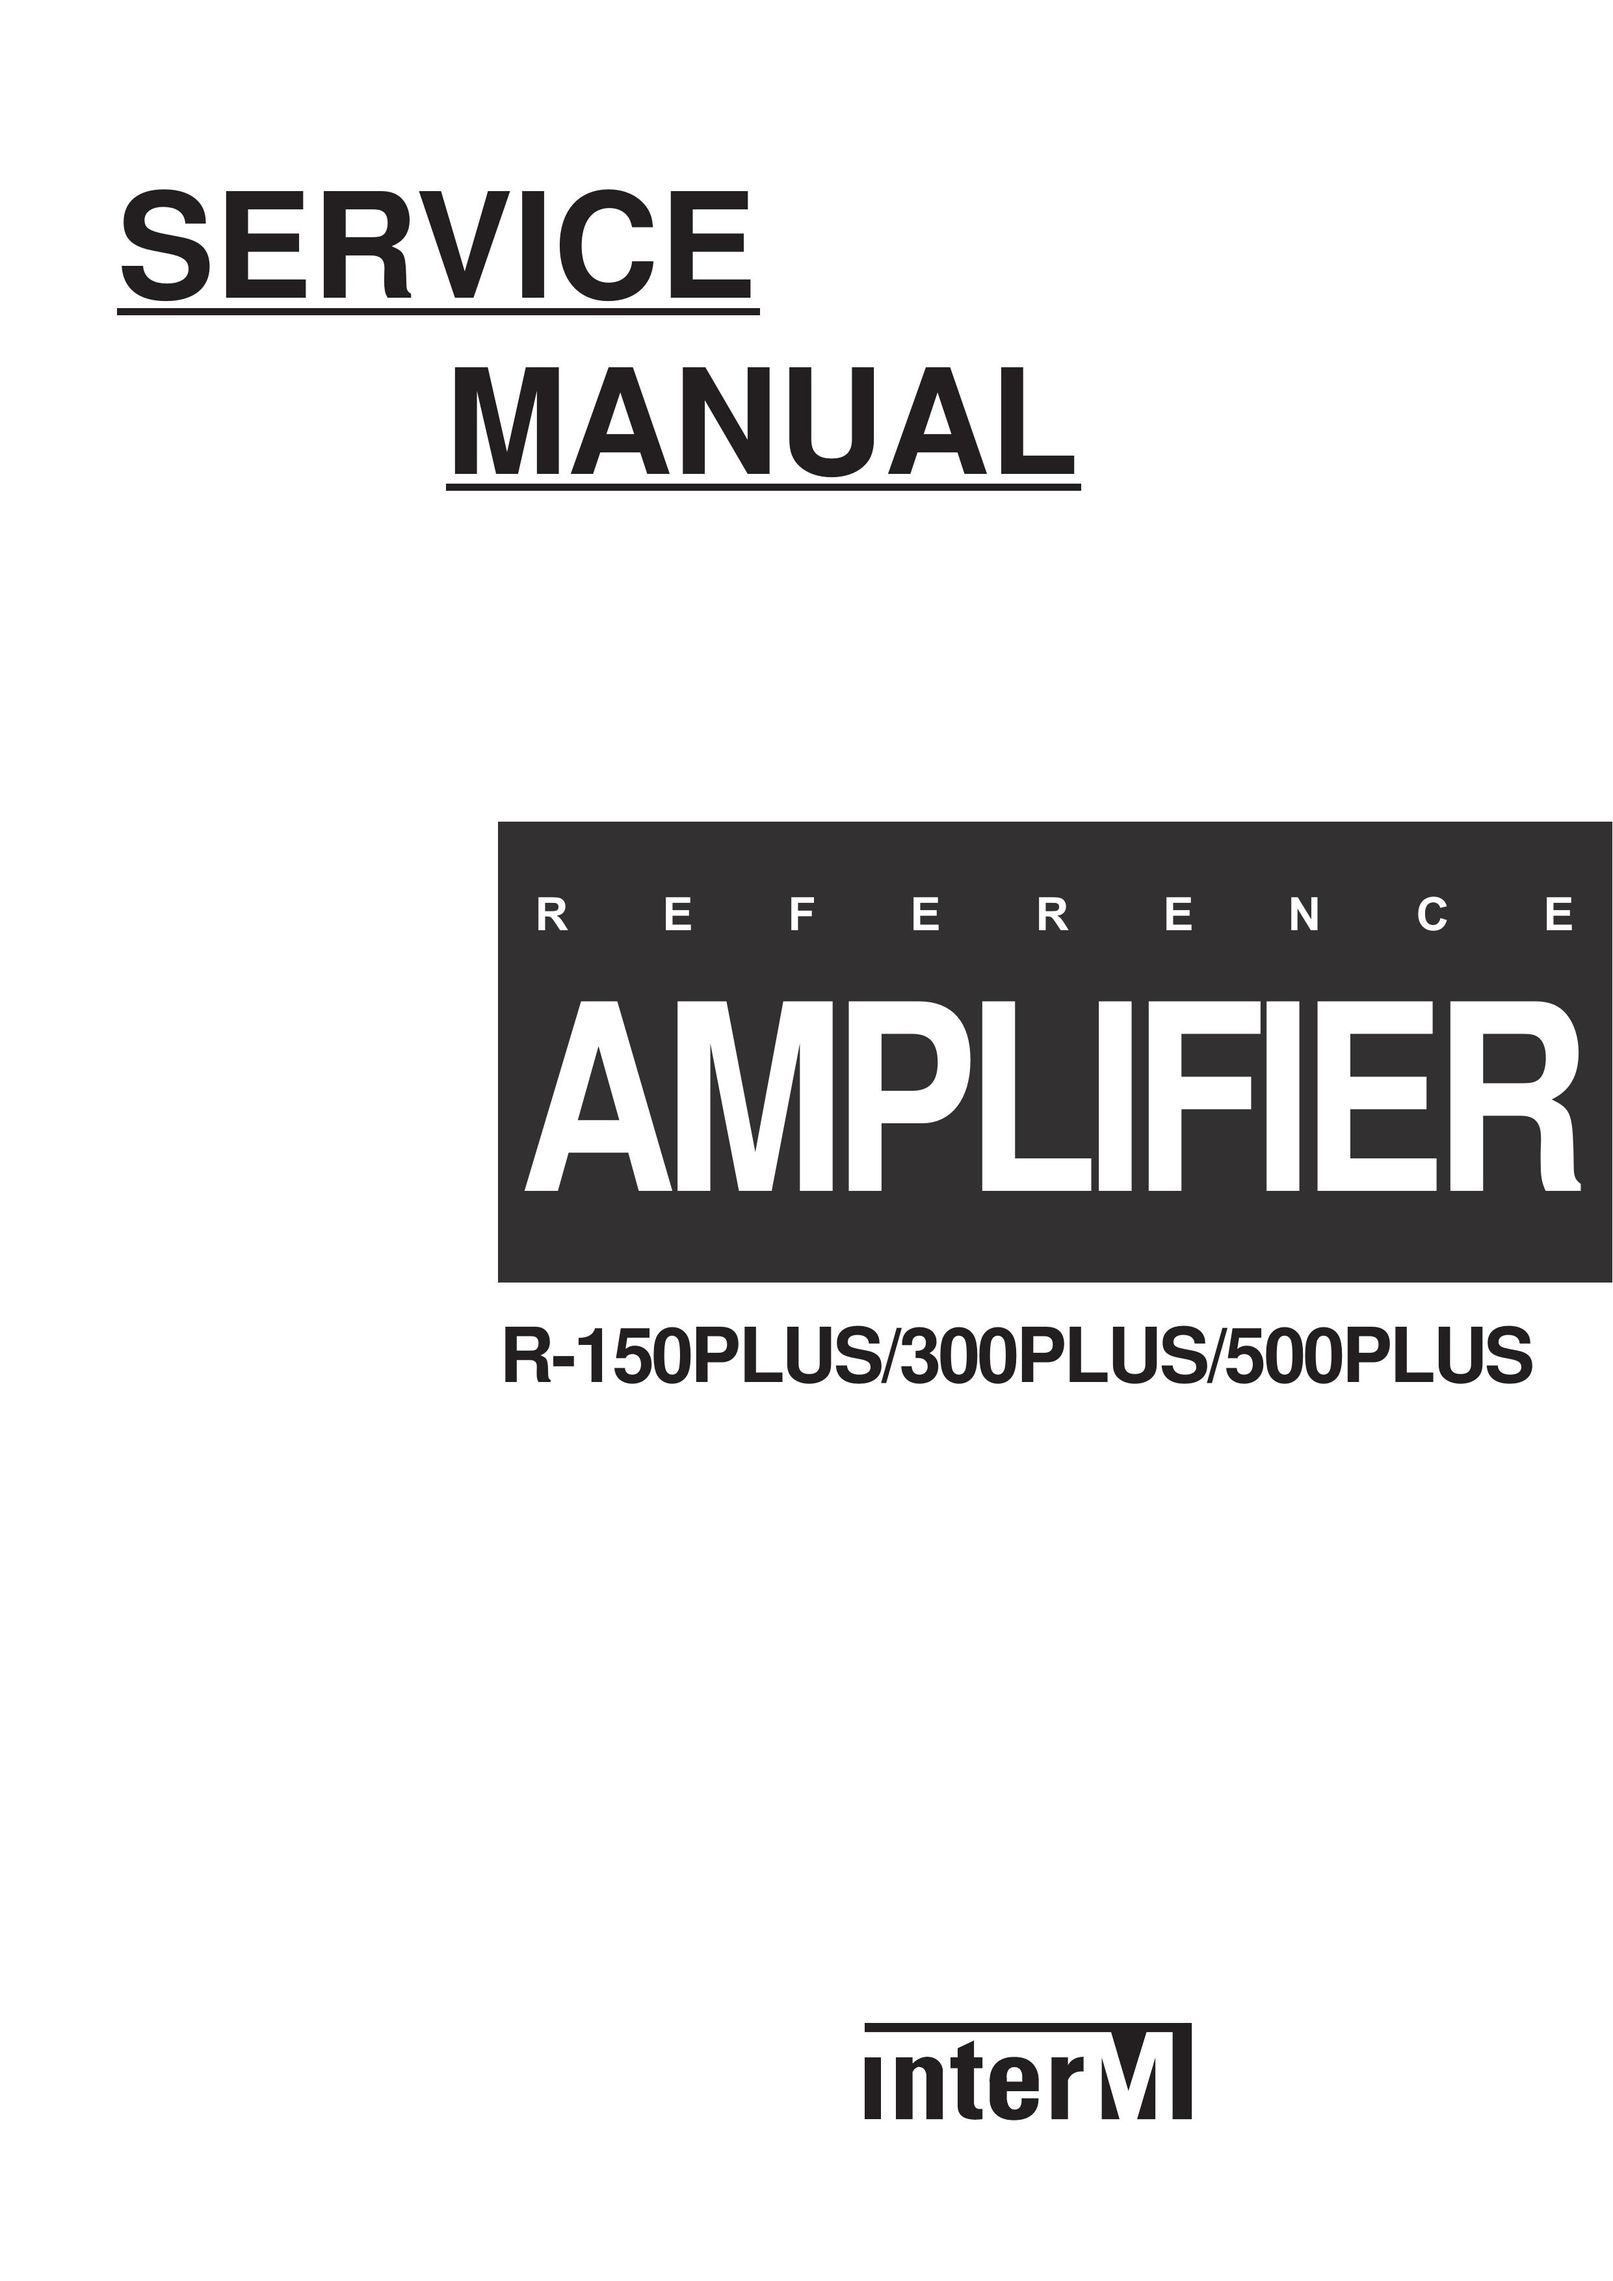 Macsense Connectivity R-150PLUS Stereo Amplifier User Manual